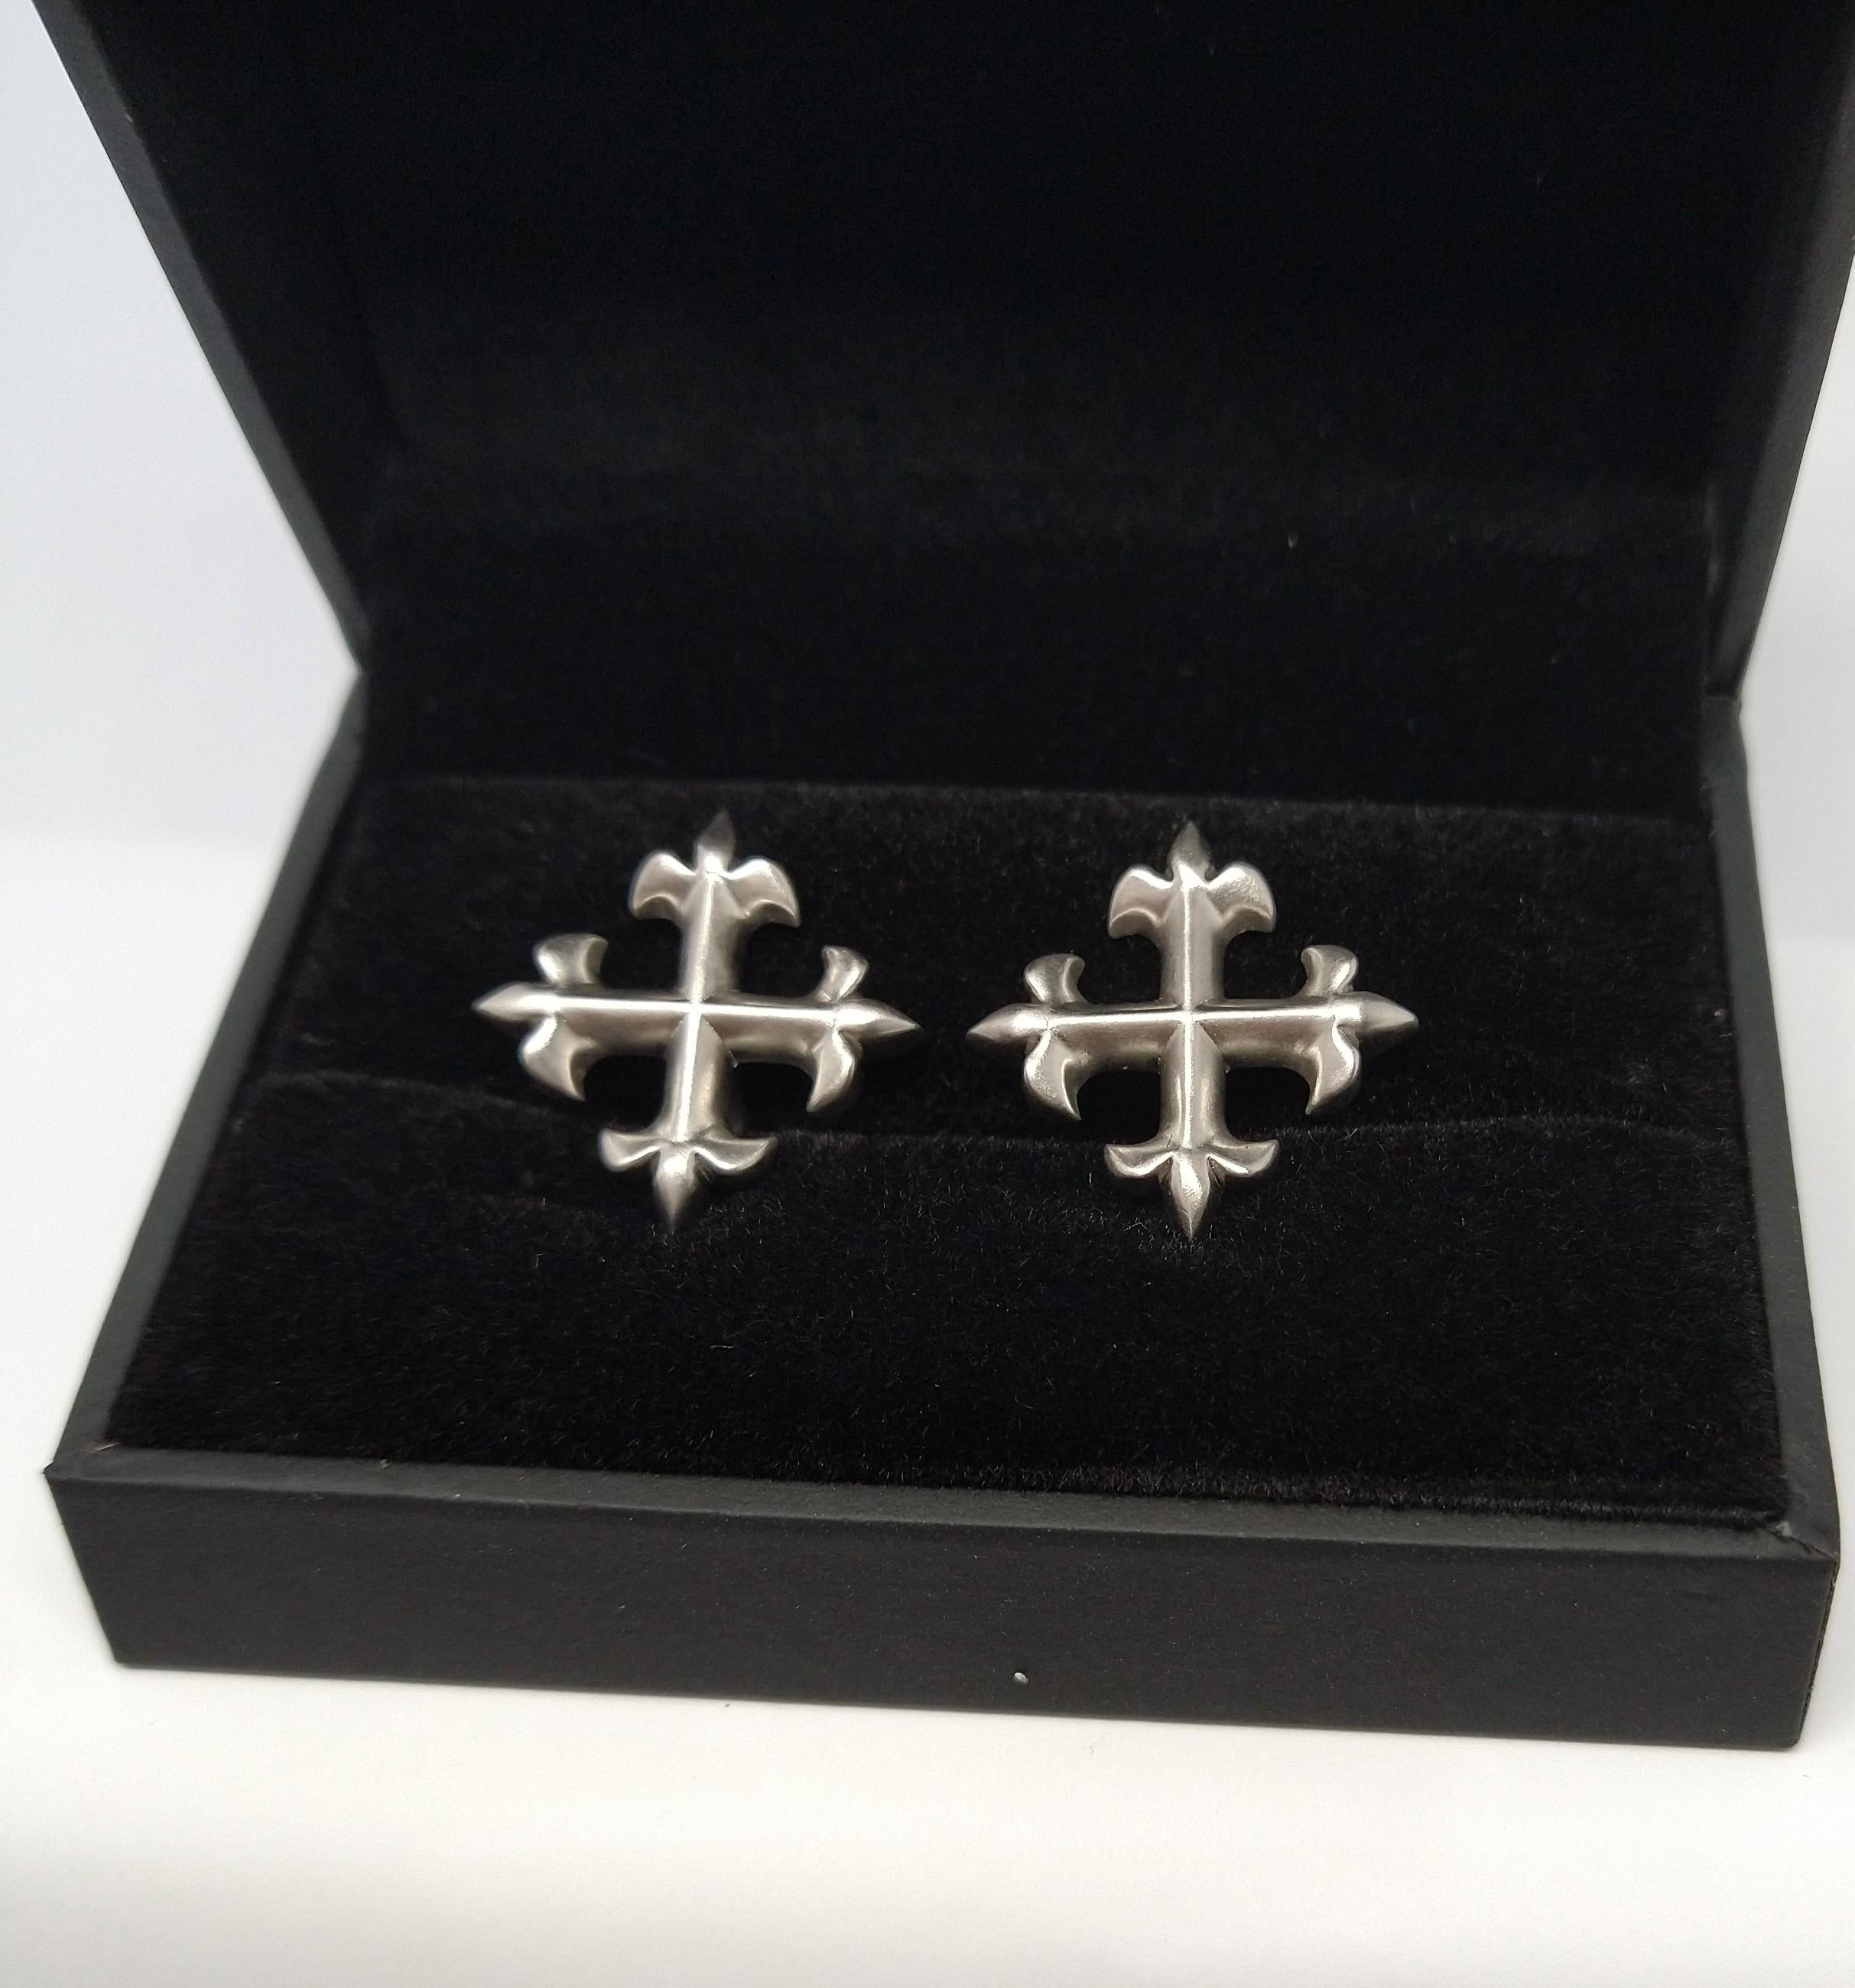  Platinum  West 46 Cross Cuff Links,  This Fleur de Lis Cross is inspired from a stain glass window in a church on west 46th street.. The royal stylized lily made of 3 petals  is known from the former Royals of Arms of France. In scripture the lily